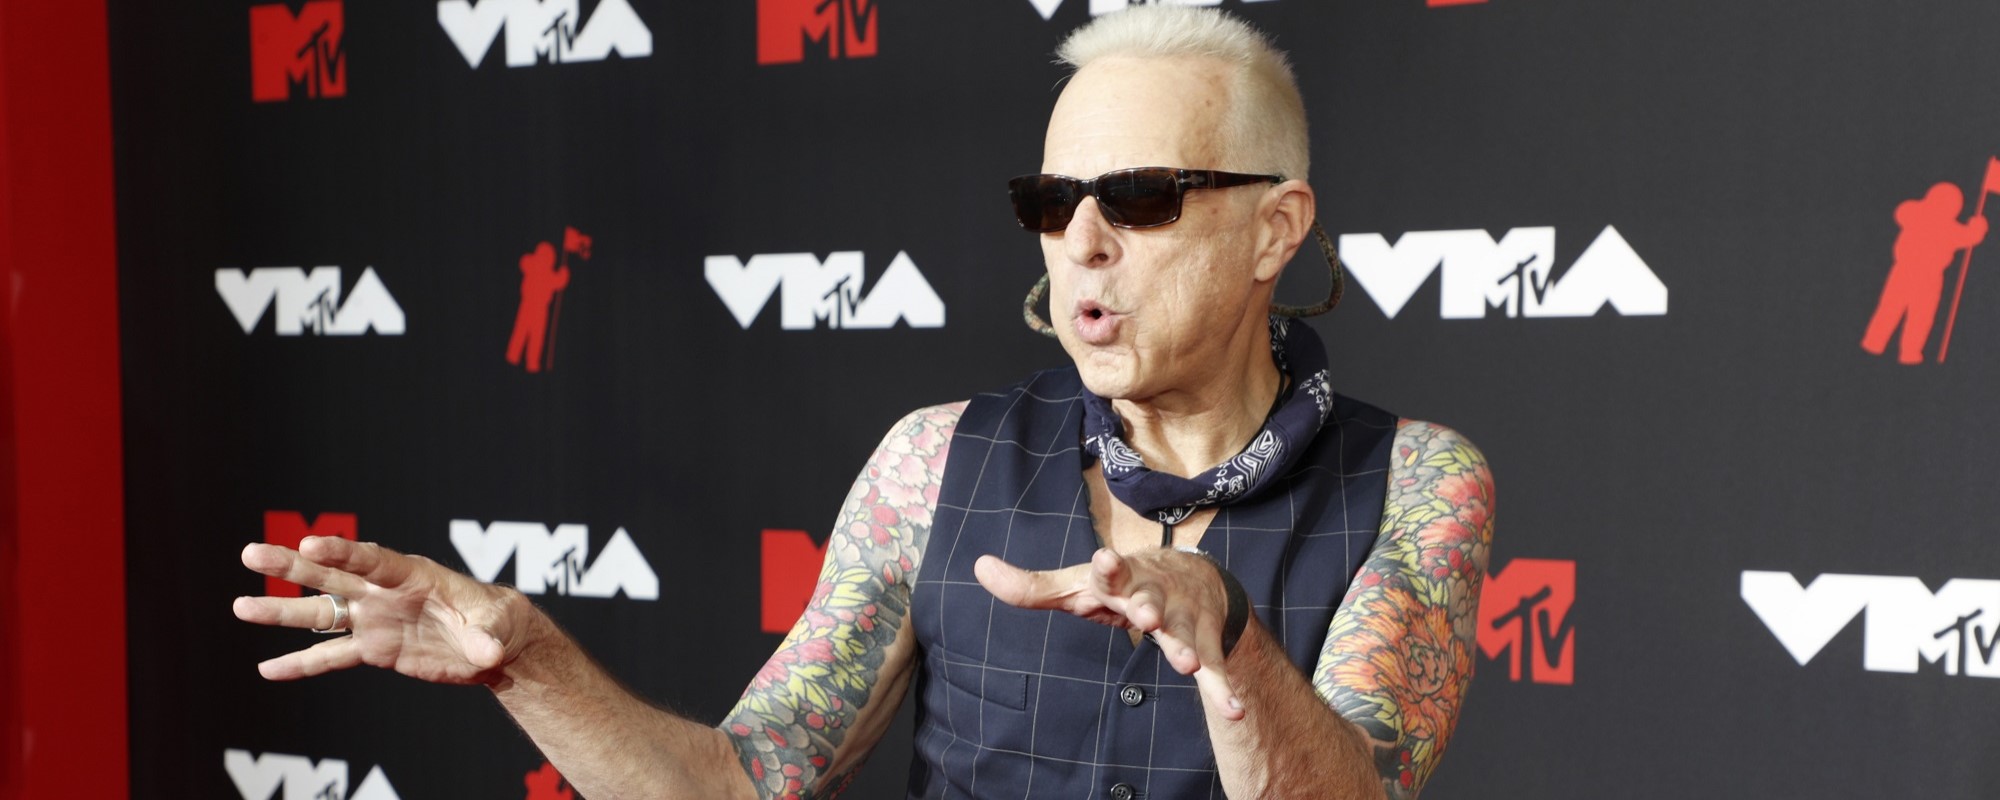 Hot for Pot: “Pothead” David Lee Roth Reveals Outrageous $92,000 Weed Bill